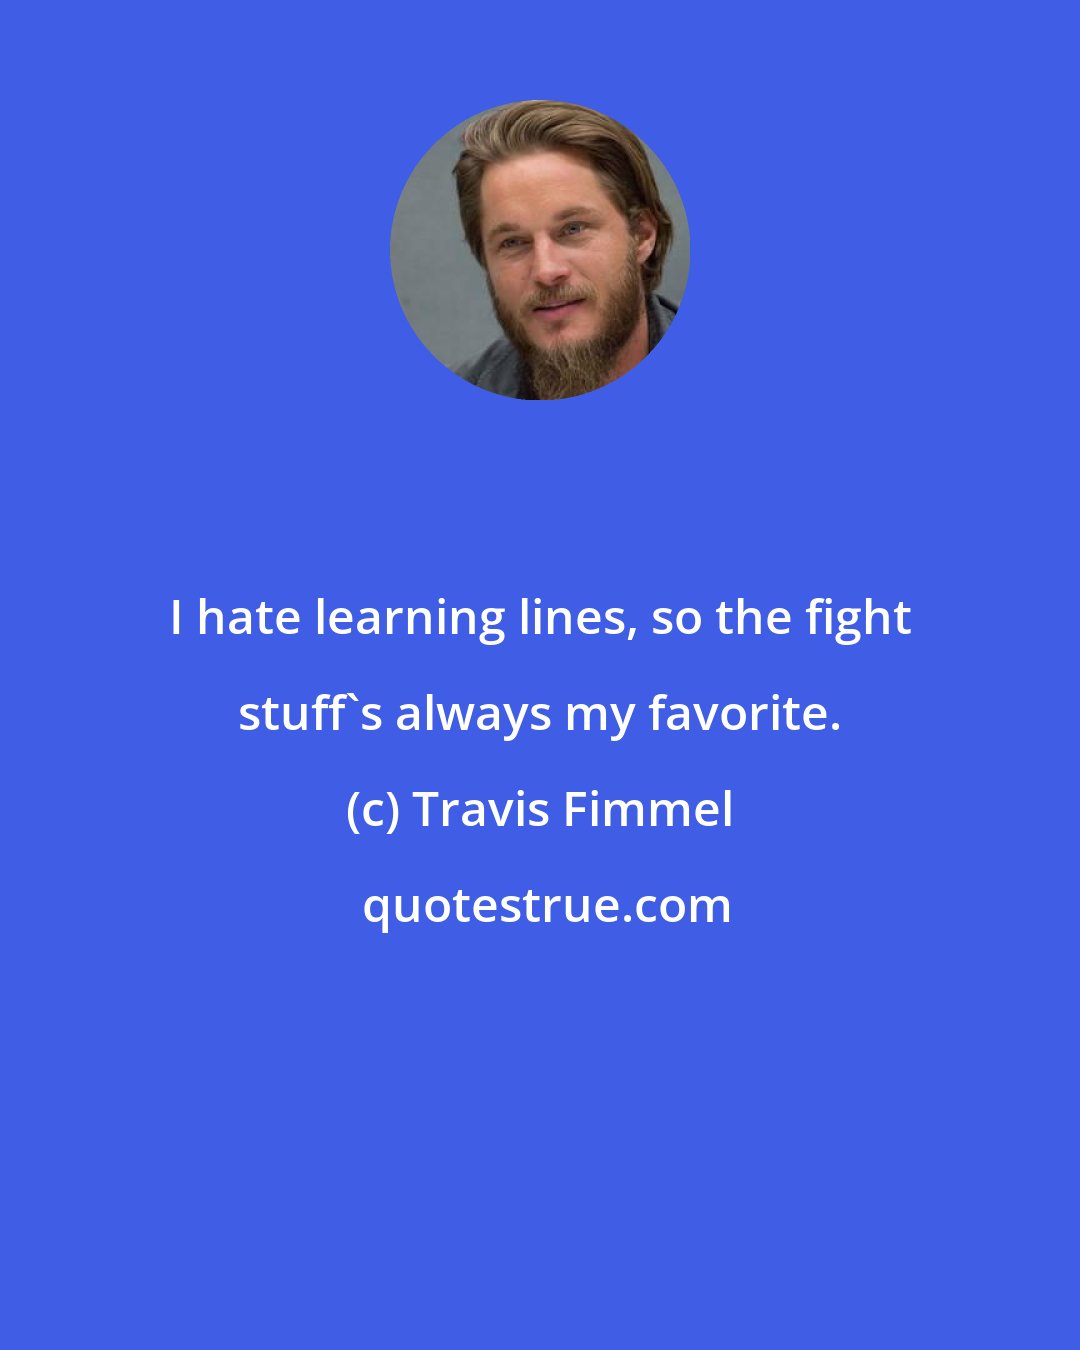 Travis Fimmel: I hate learning lines, so the fight stuff's always my favorite.